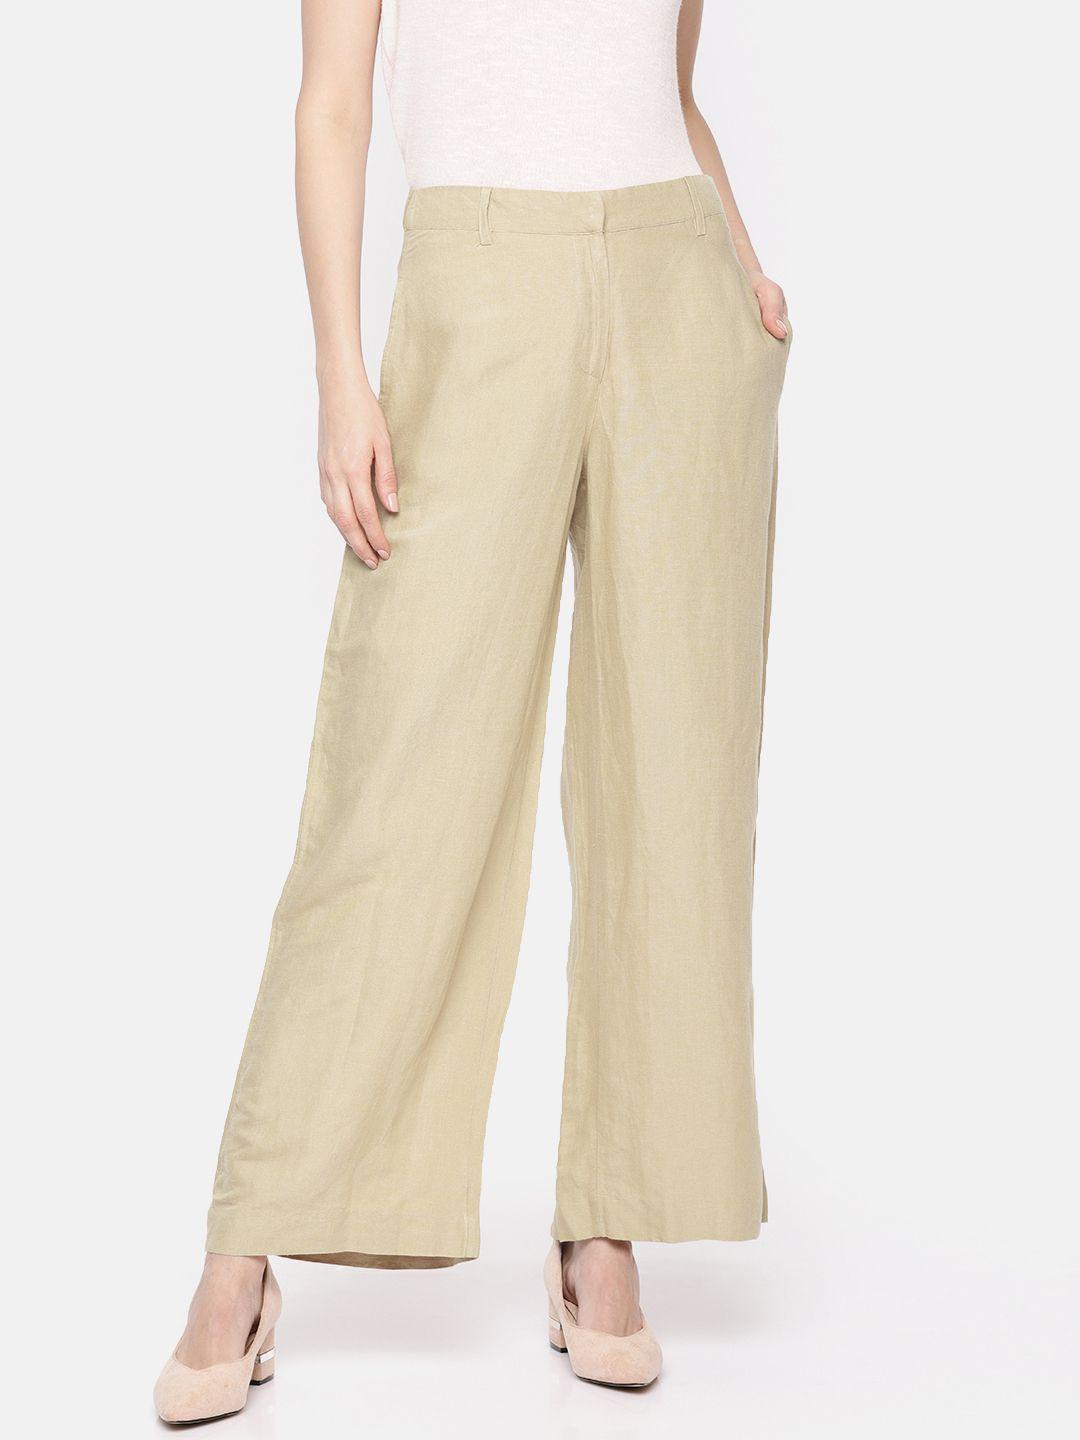 vero moda women khaki relaxed straight fit solid parallel trousers